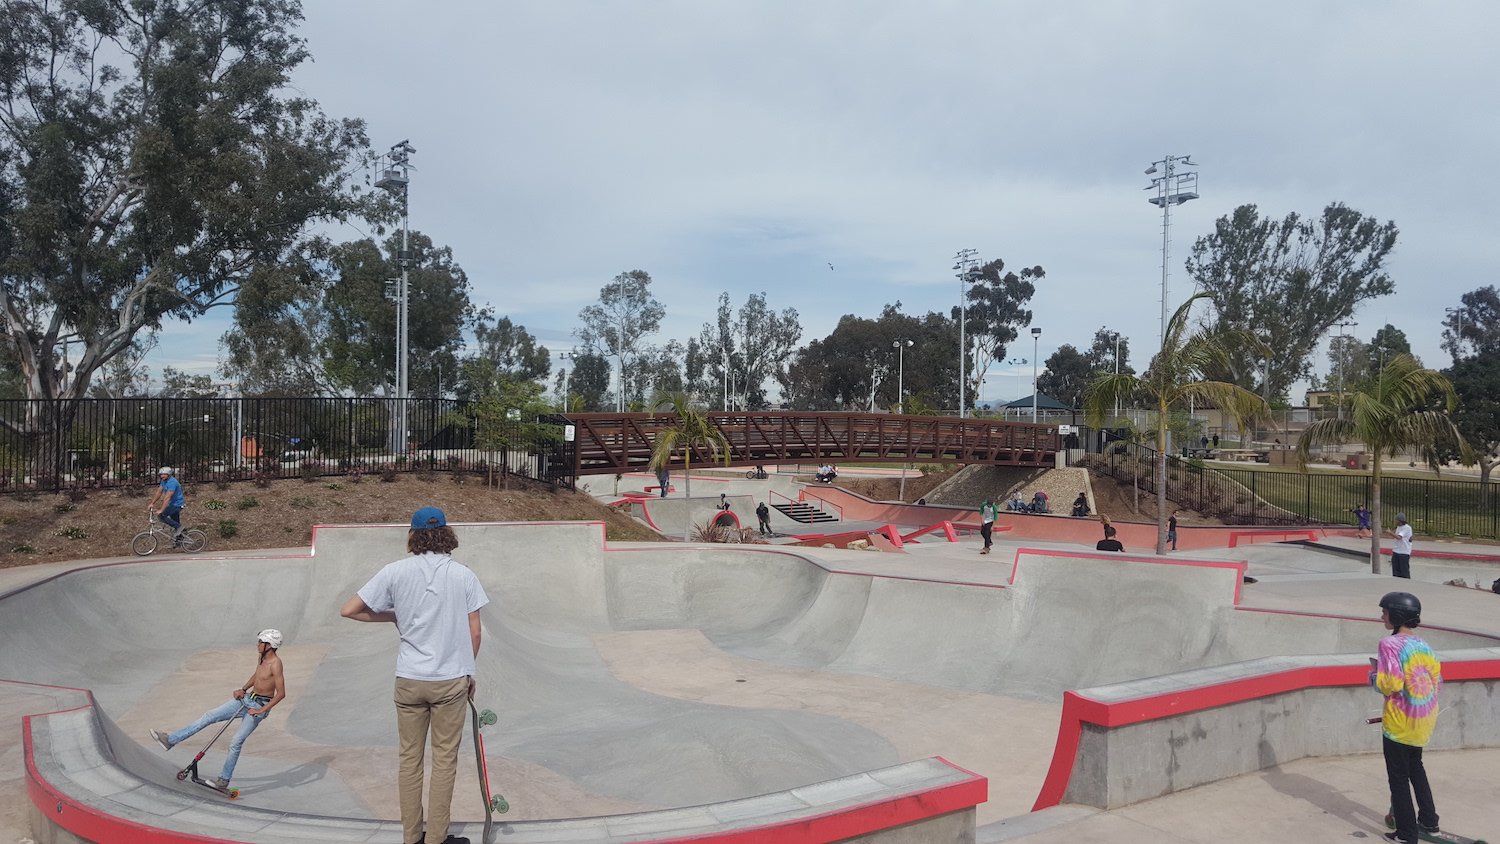 Linda Vista skatepark in San Diego featuring skaters on the side of a half-pipe